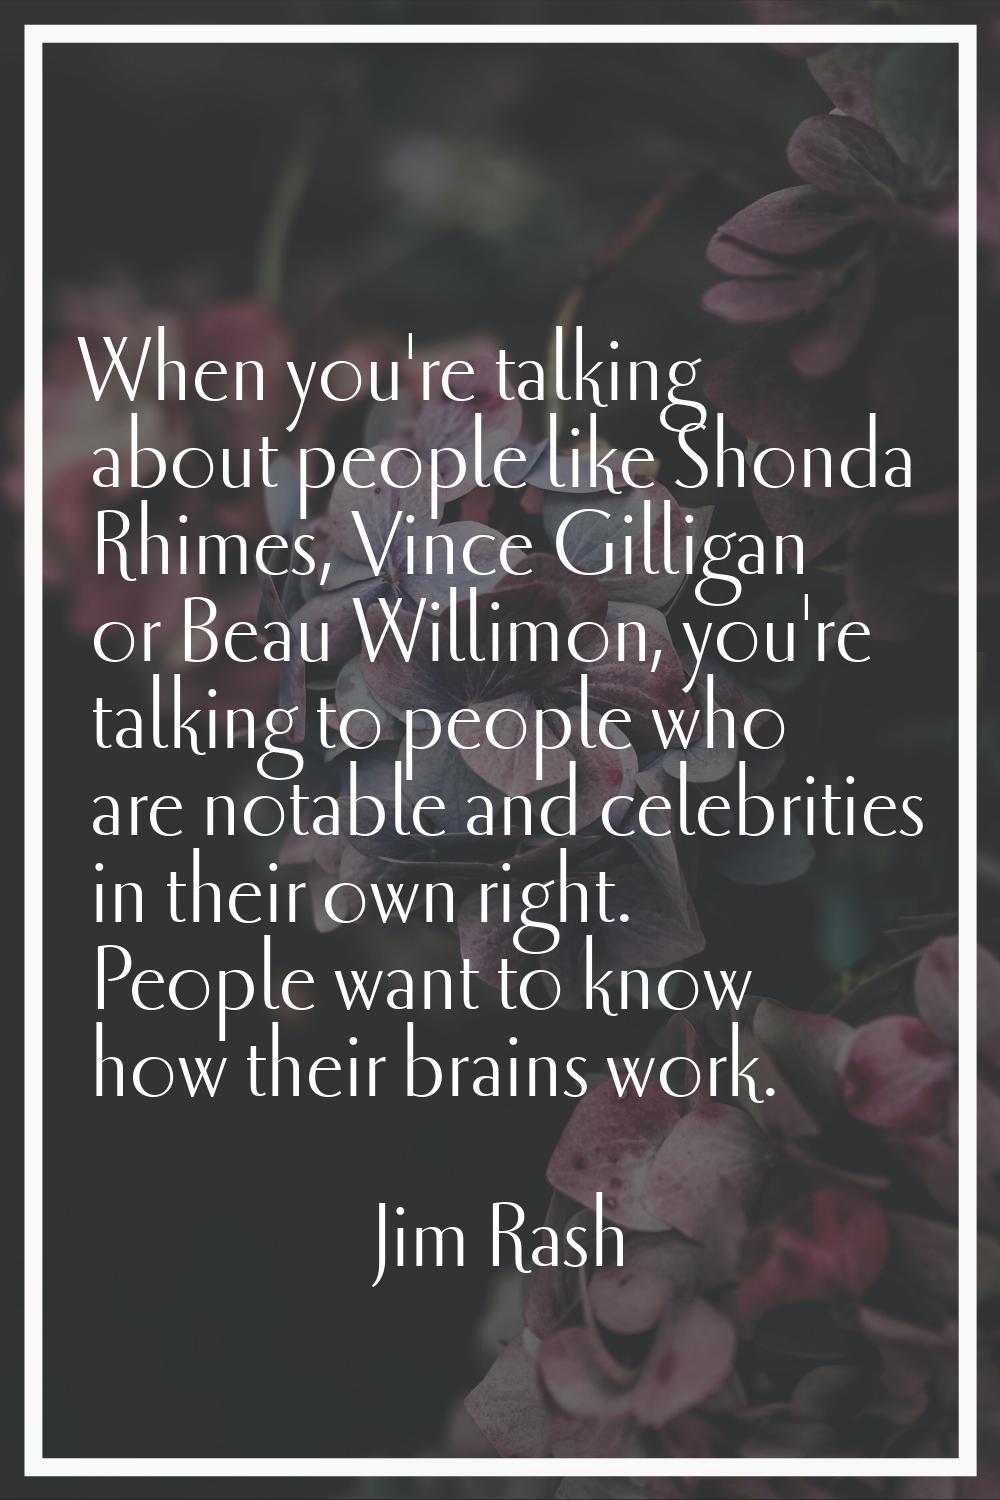 When you're talking about people like Shonda Rhimes, Vince Gilligan or Beau Willimon, you're talkin